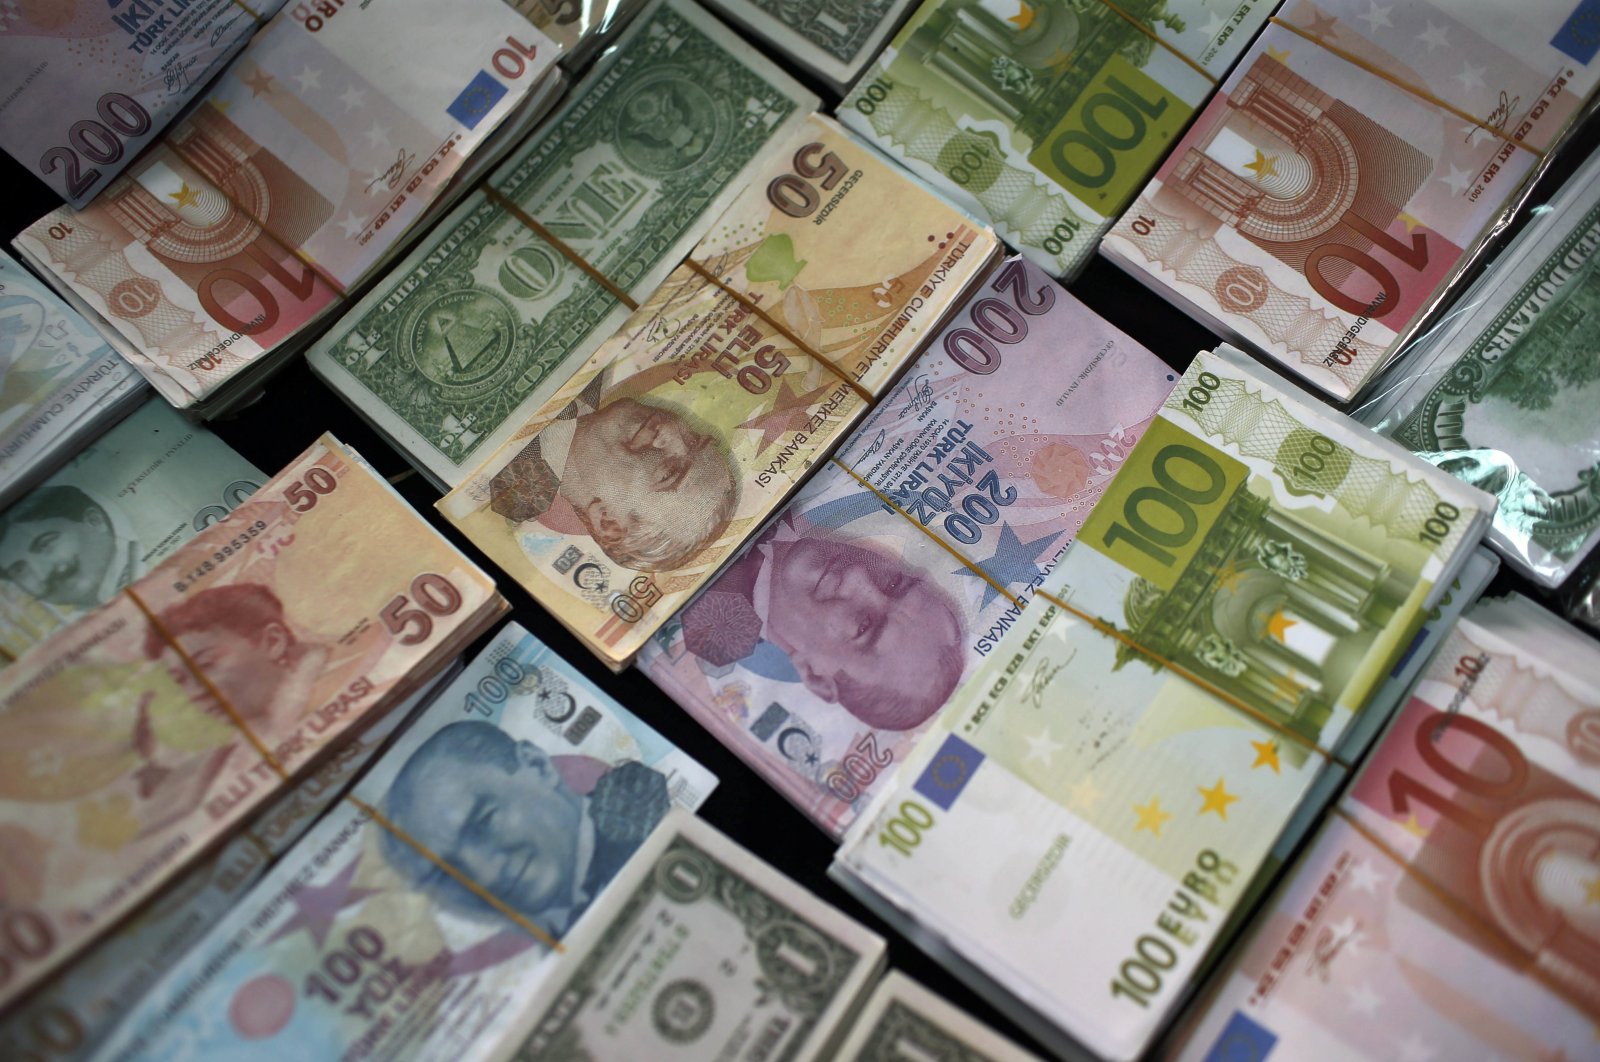 Turkish liras, euros and U.S. dollars are stacked at a currency exchange office in Istanbul, Turkey, June 8, 2015. (AP Photo)